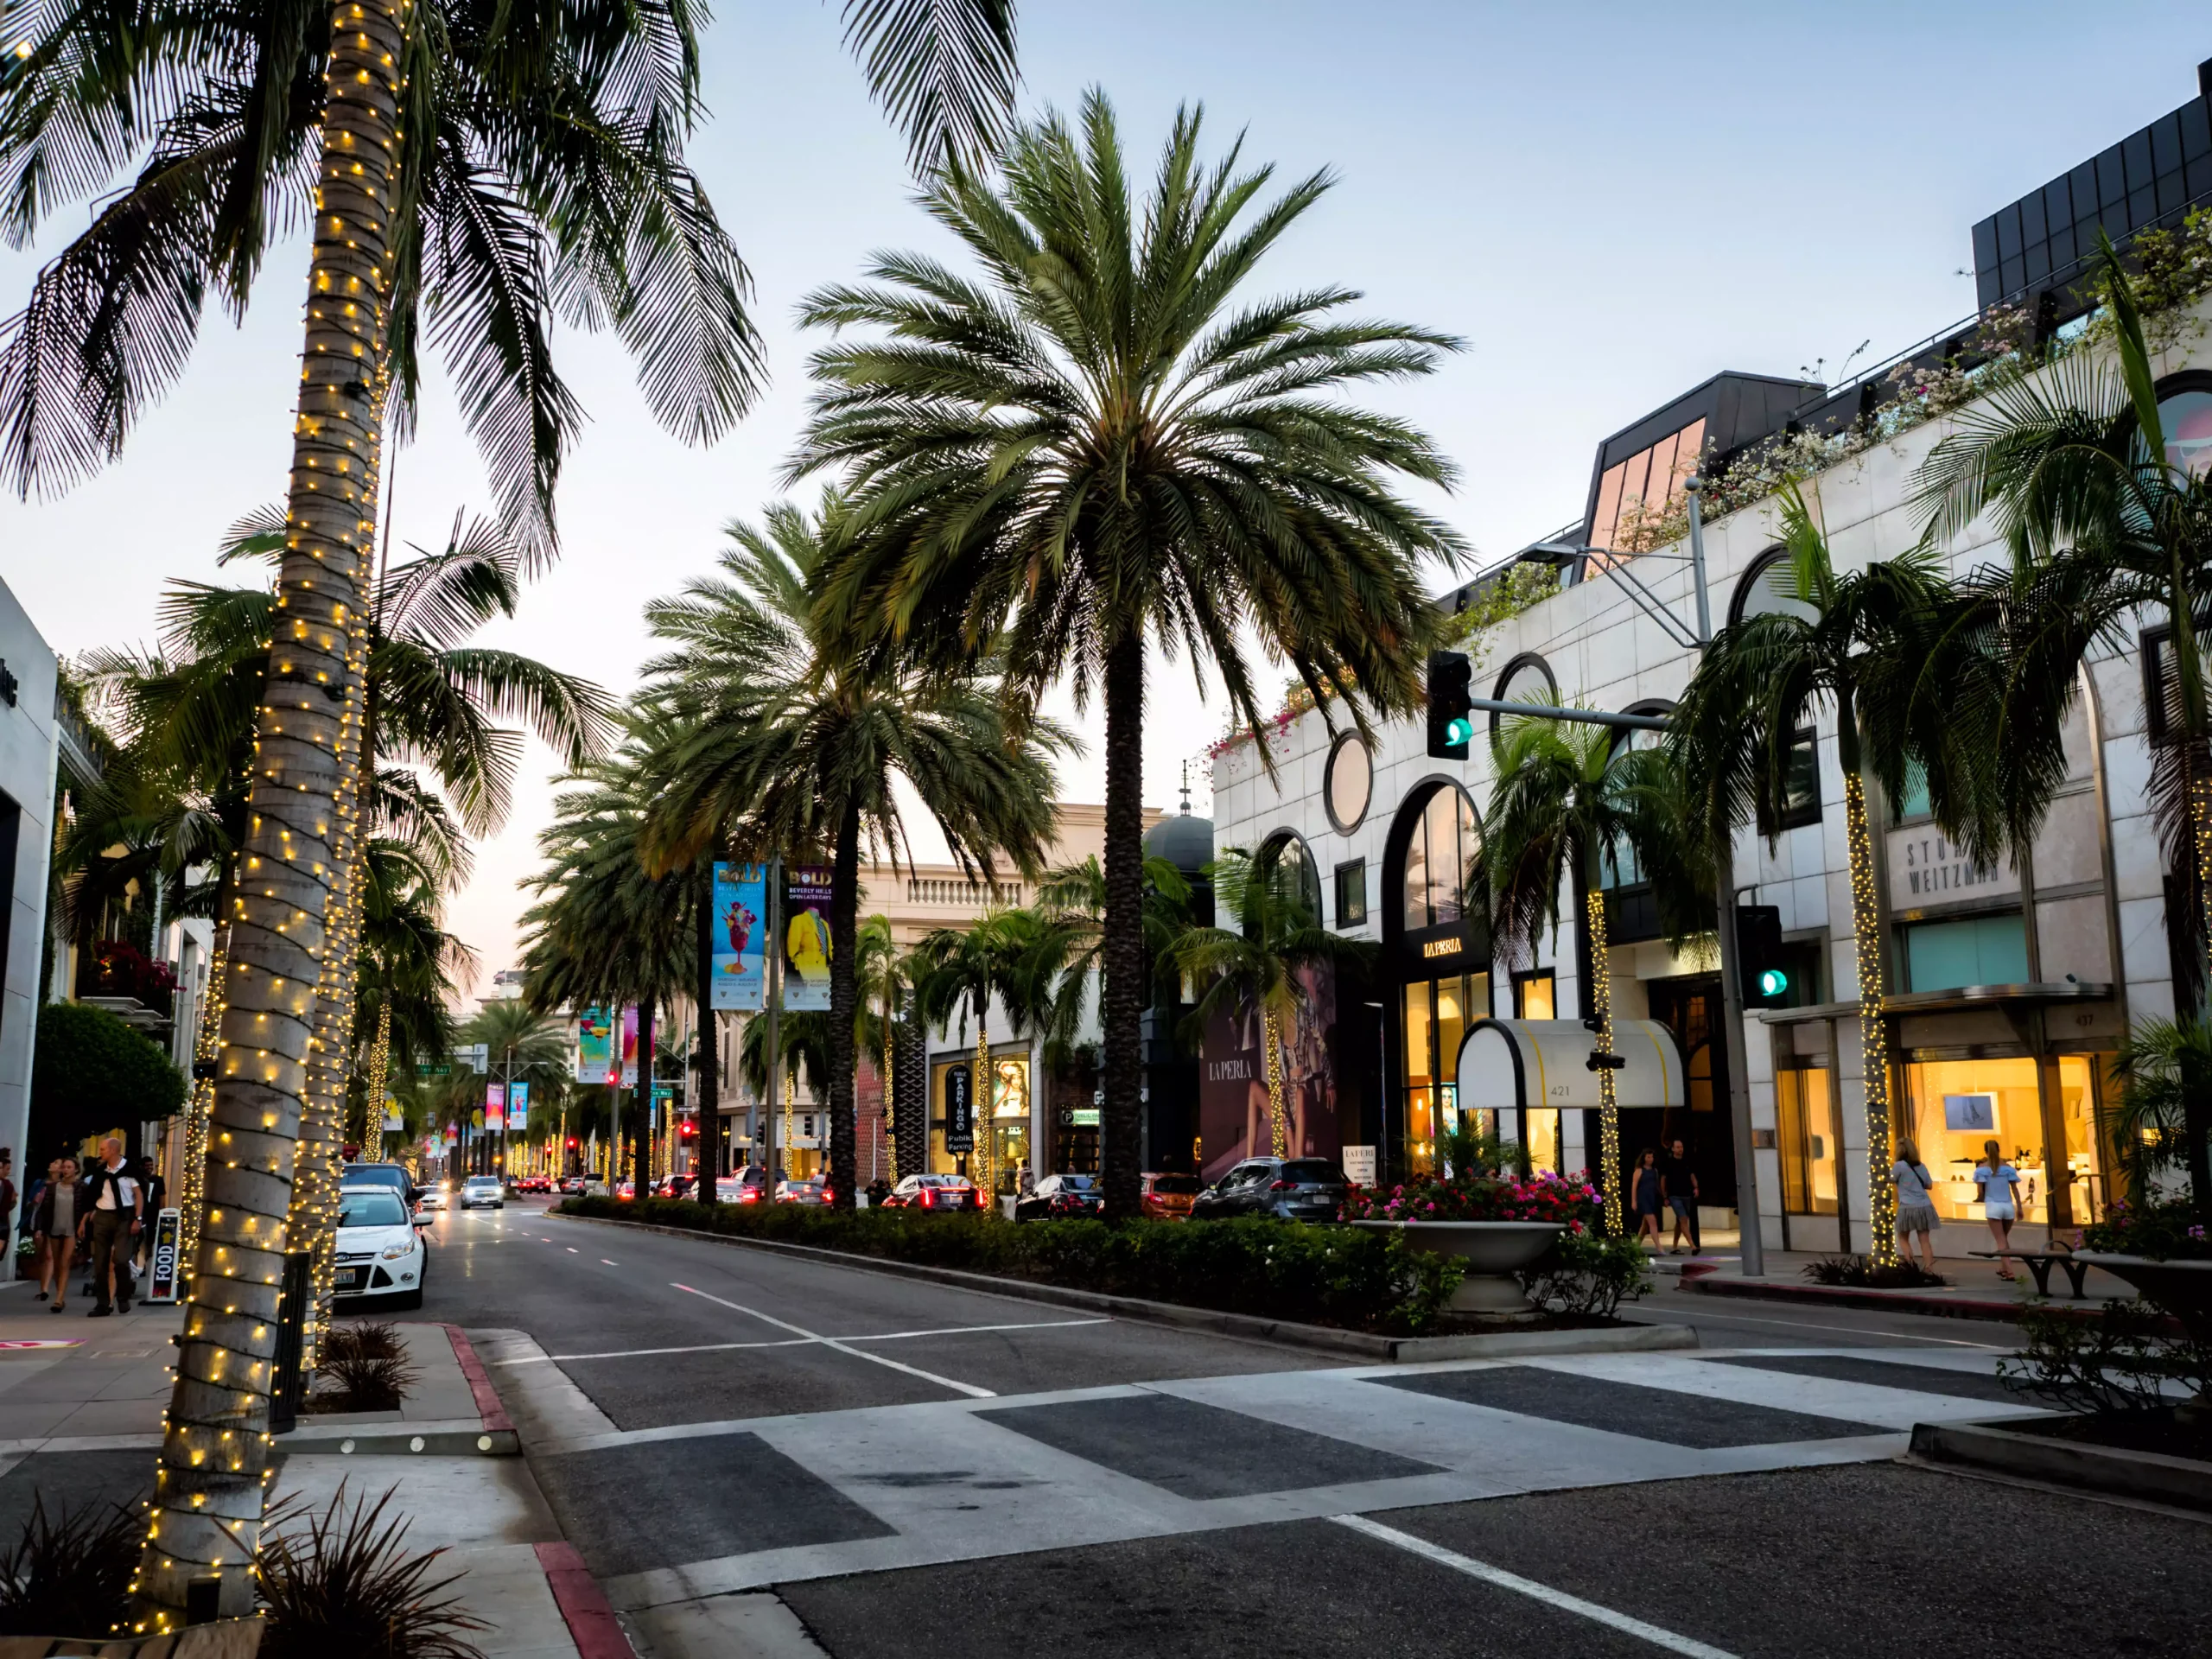 Rodeo Drive image 2 scaled